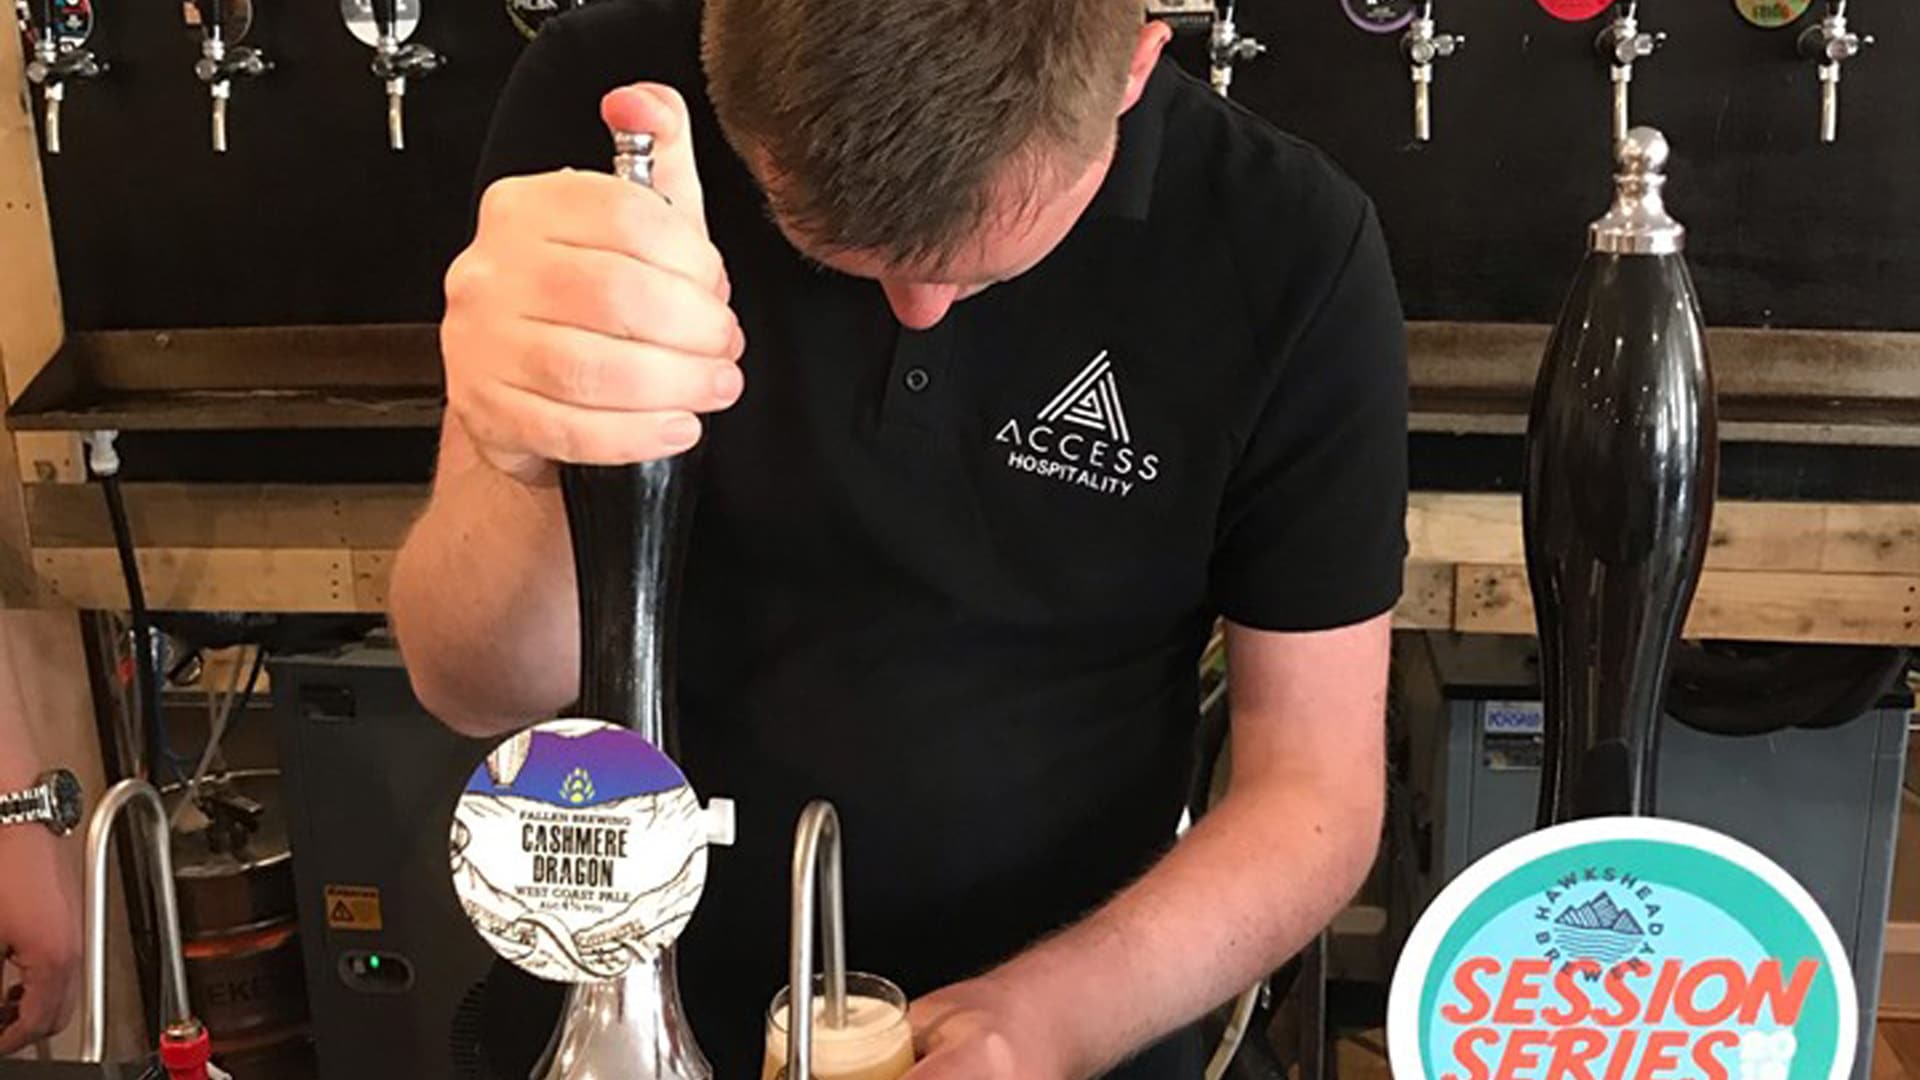 Pennine Magpies member wearing an Access Hospitality t-shirt, standing behind a bar, pulling a pint